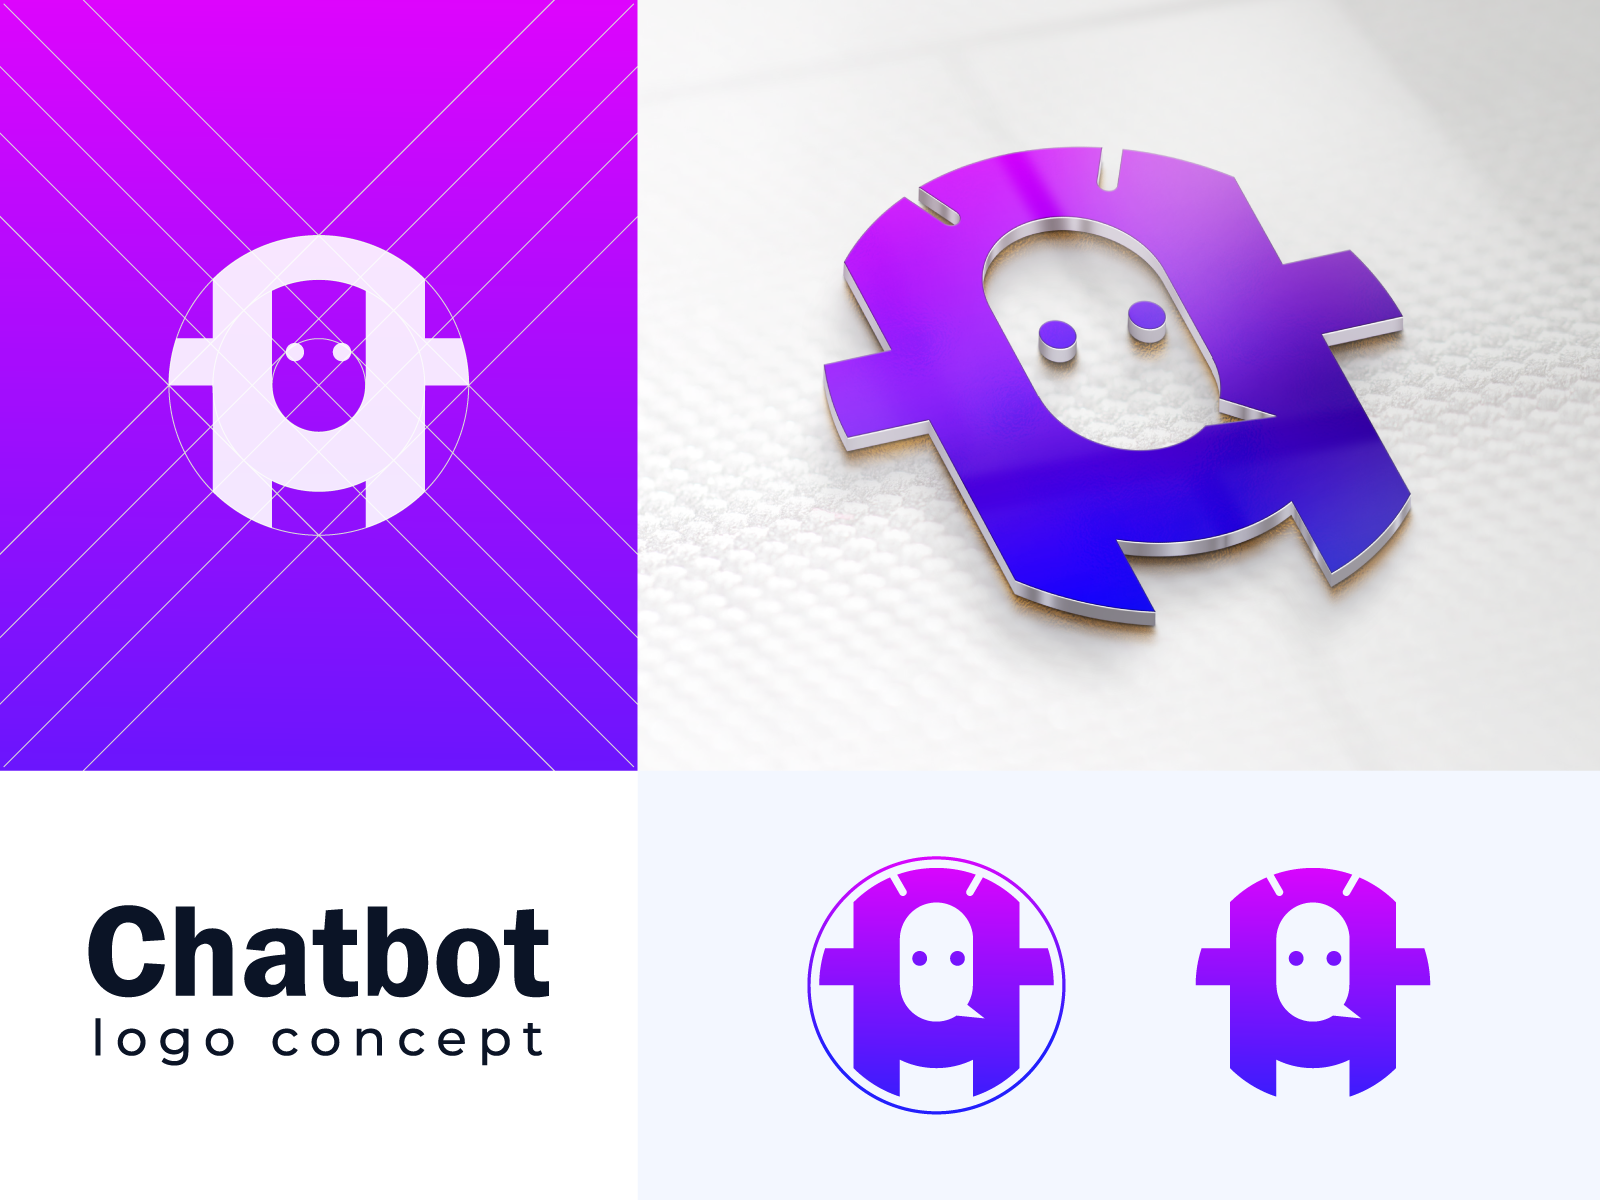 Discord to roll out AI-powered chatbot, messaging features, Telecom News,  ET Telecom